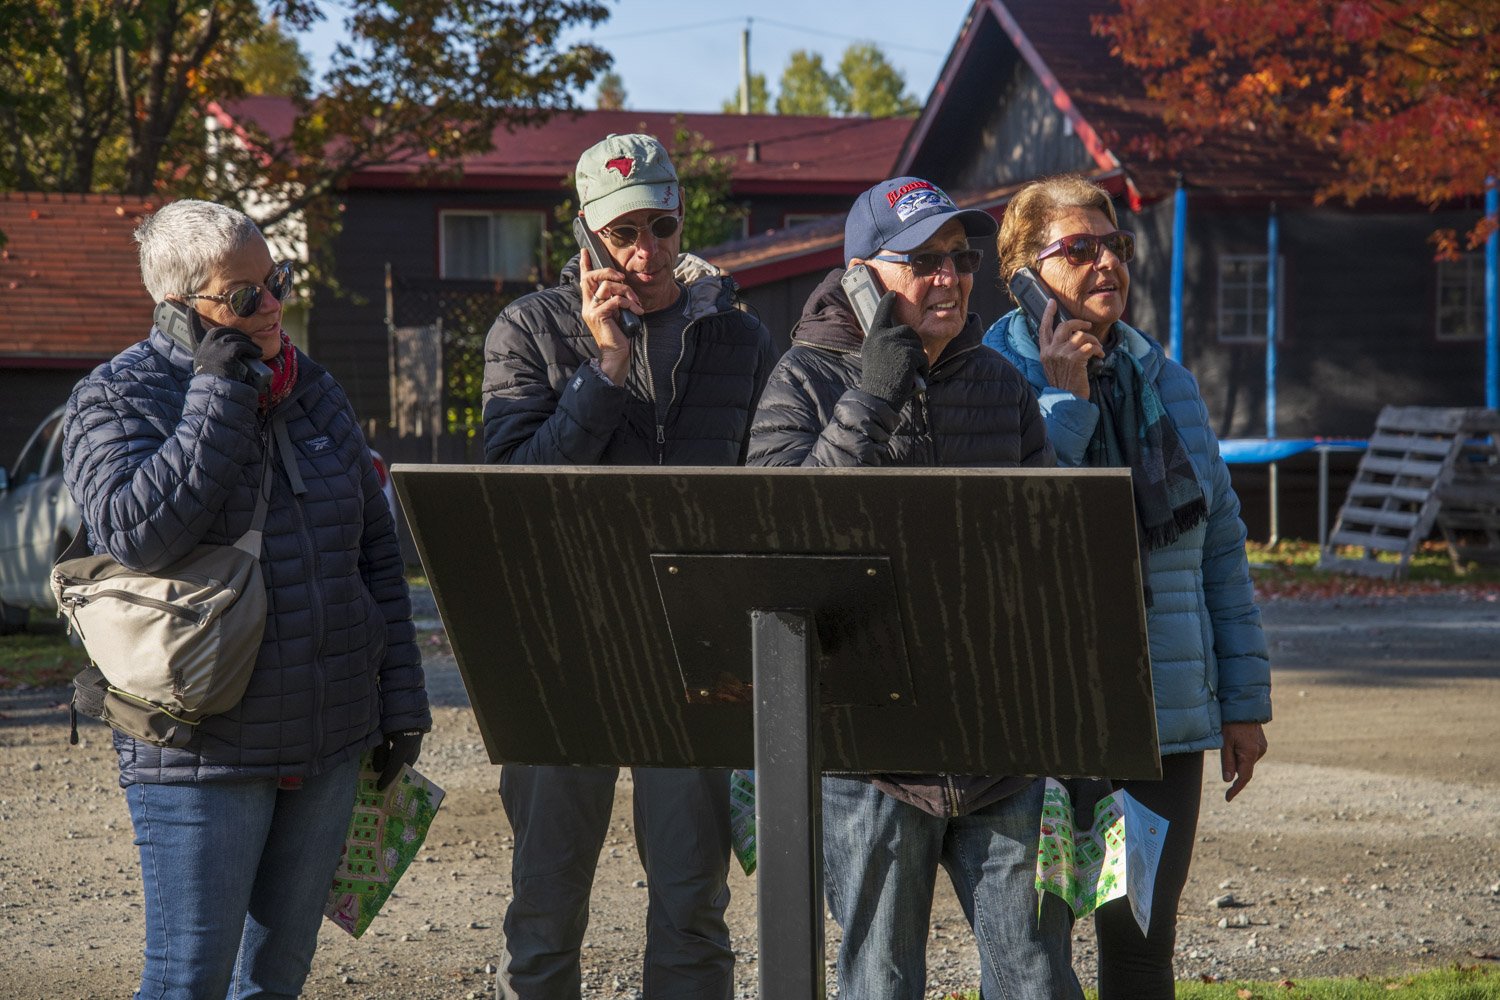  A group of tourists listen to audio devices during a walking tour of the mining village. Now a neighbourhood in the city of Val-d’Or, the village was declared a provincial heritage site in 1979 under Quebec’s Cultural Property Act now the Cultural H